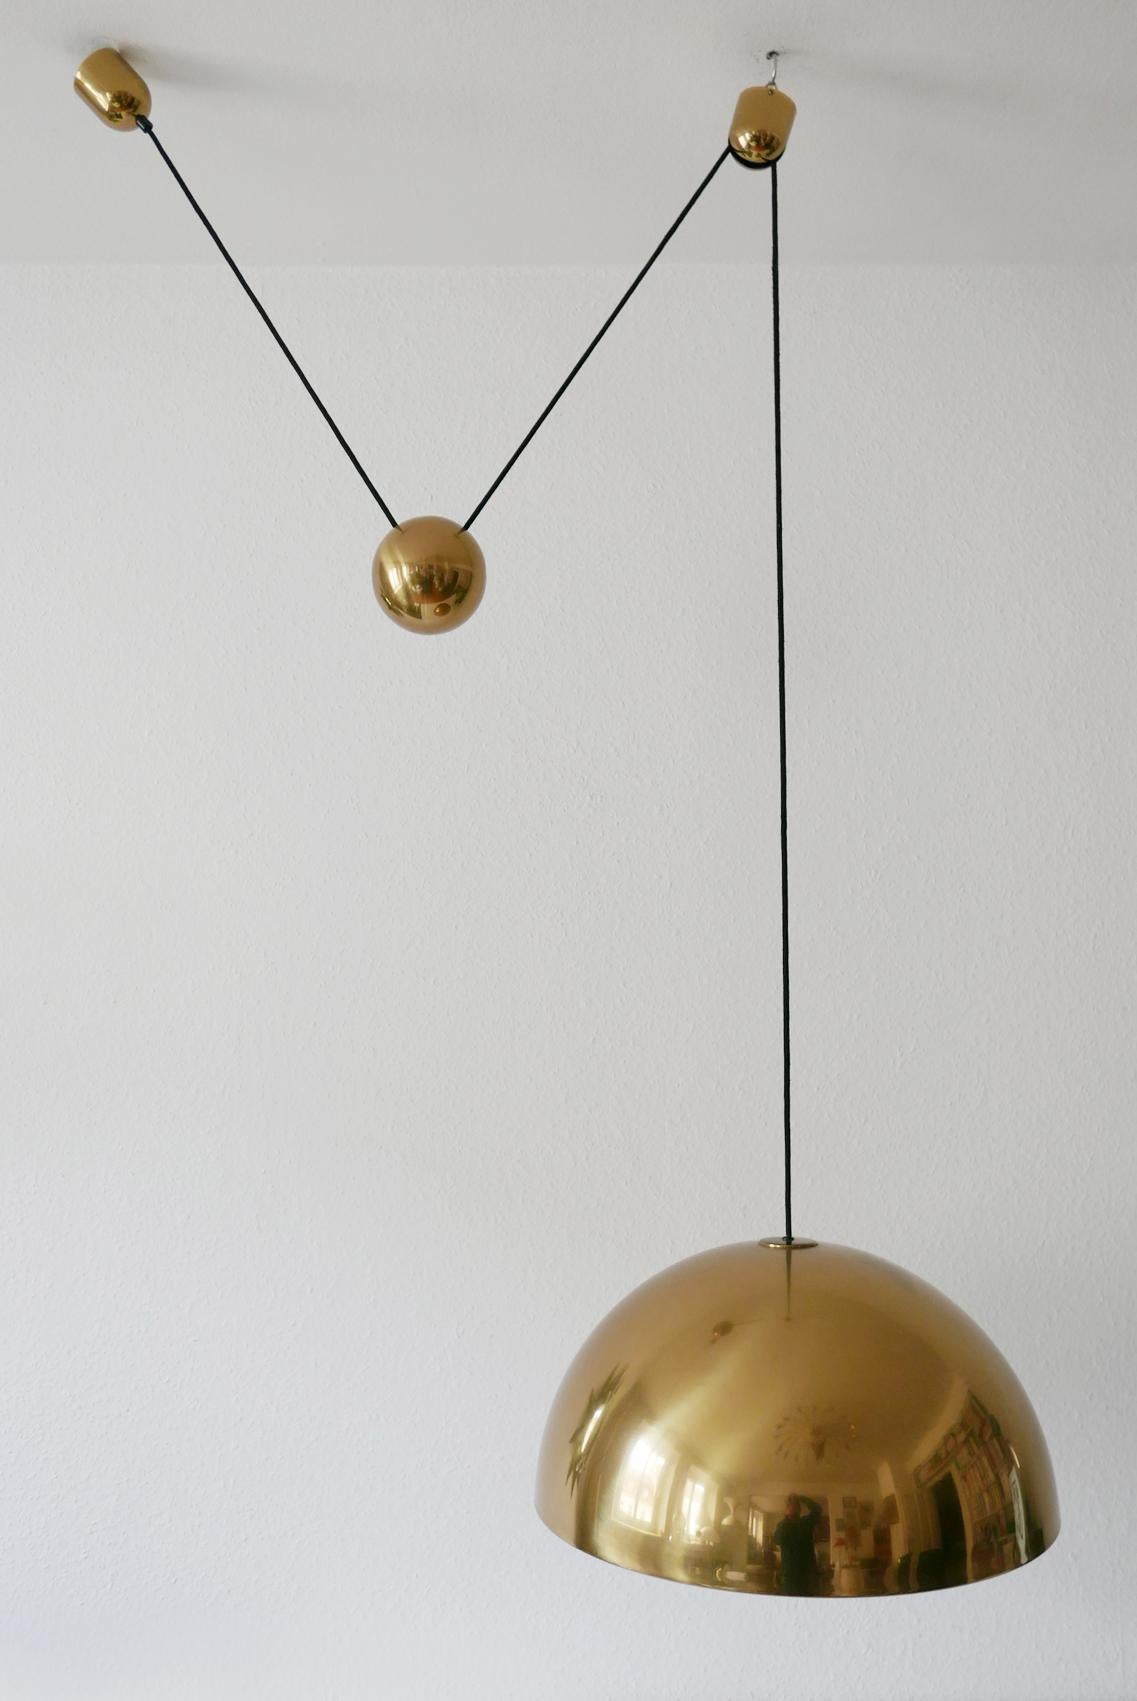 Exceptional Solan Counter Balance Pendant Lamp by Florian Schulz, 1980s, Germany For Sale 6